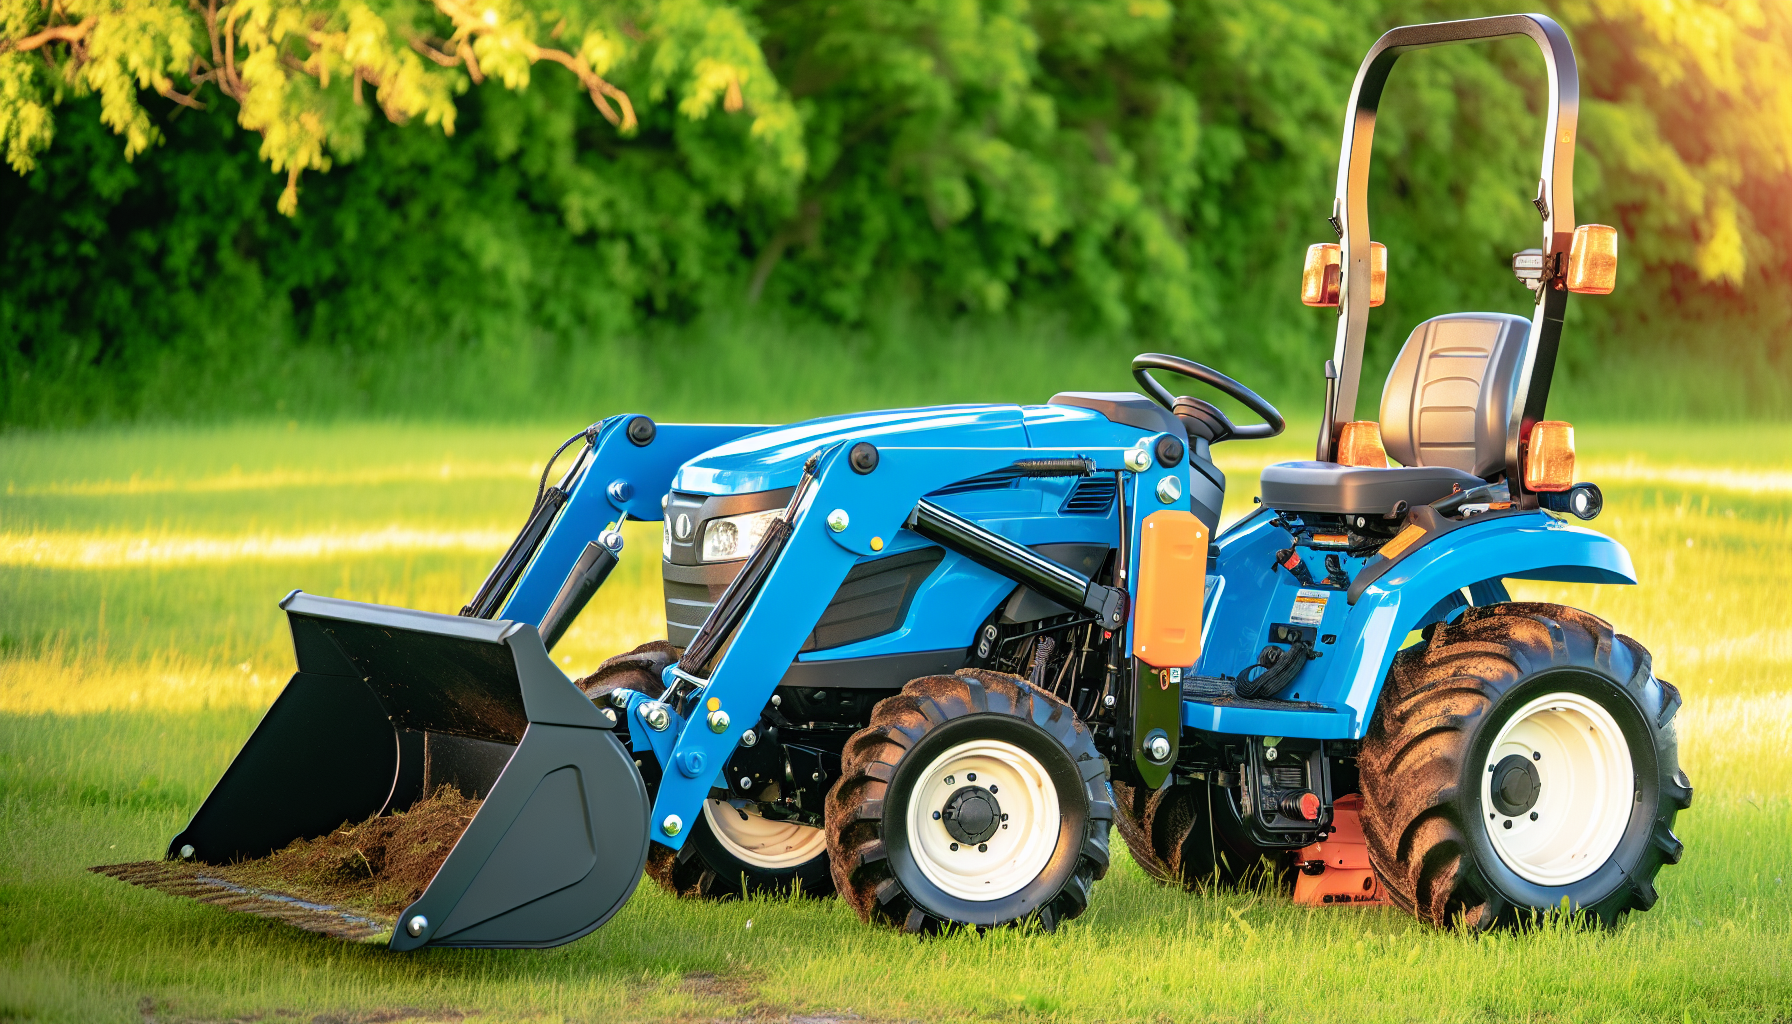 A compact utility tractor with a front loader and bucket attachment